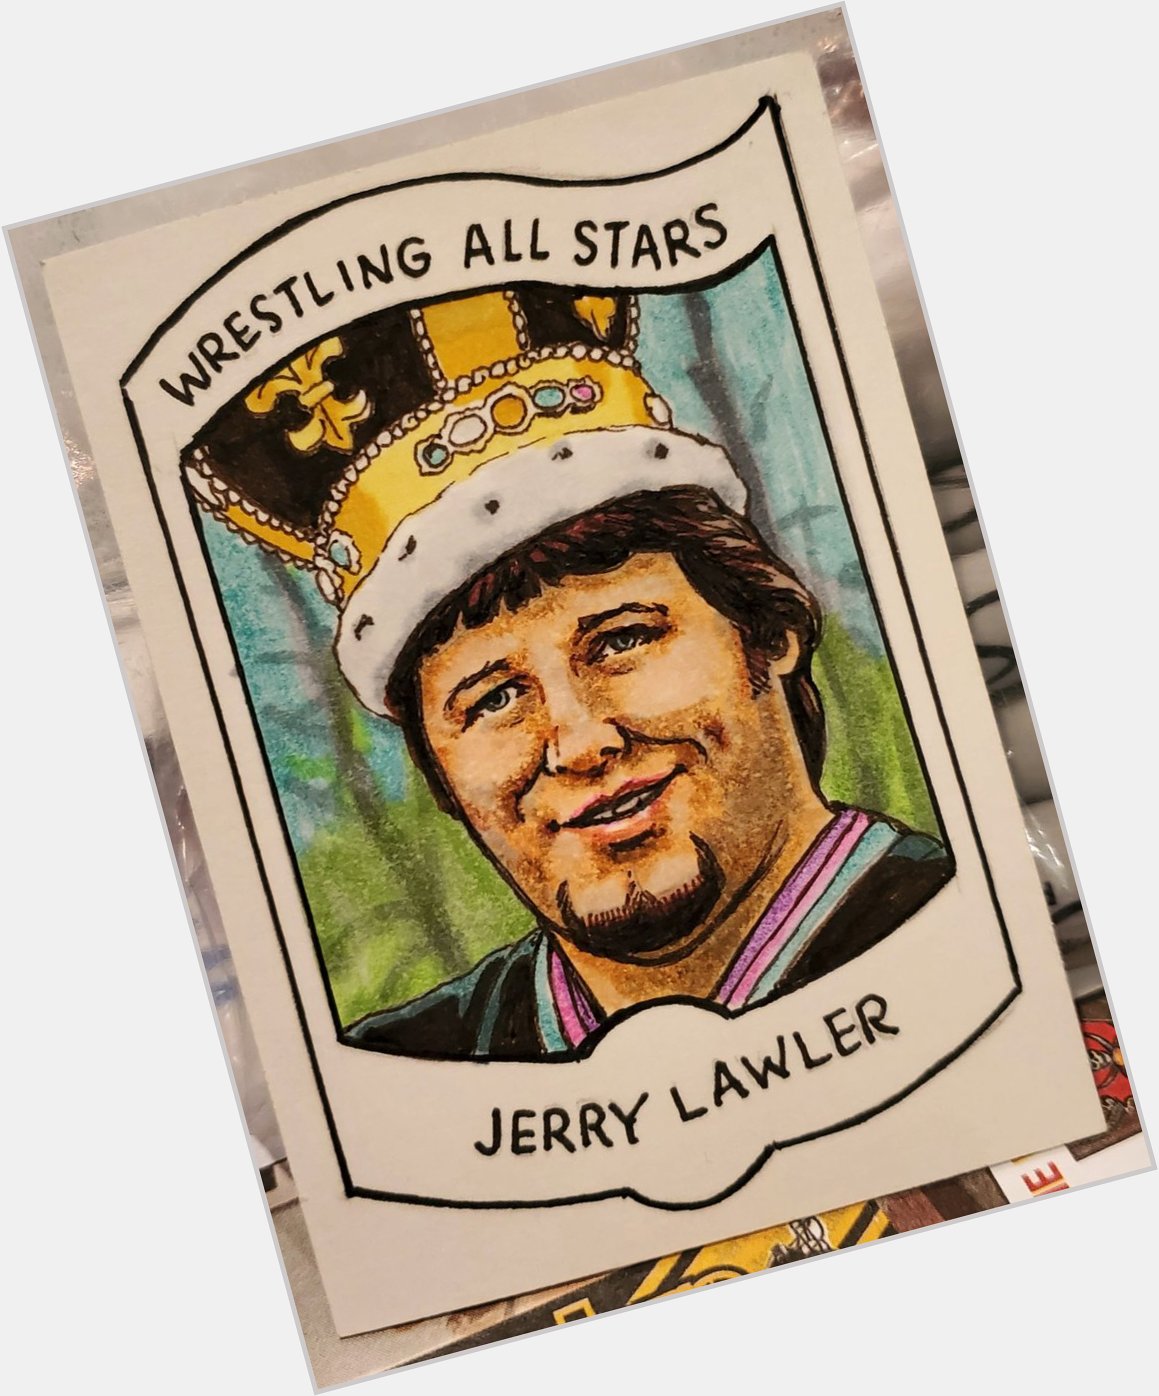 Happy Birthday to The King Jerry Lawler. A man who has done it all in professional wrestling. Long live The King   